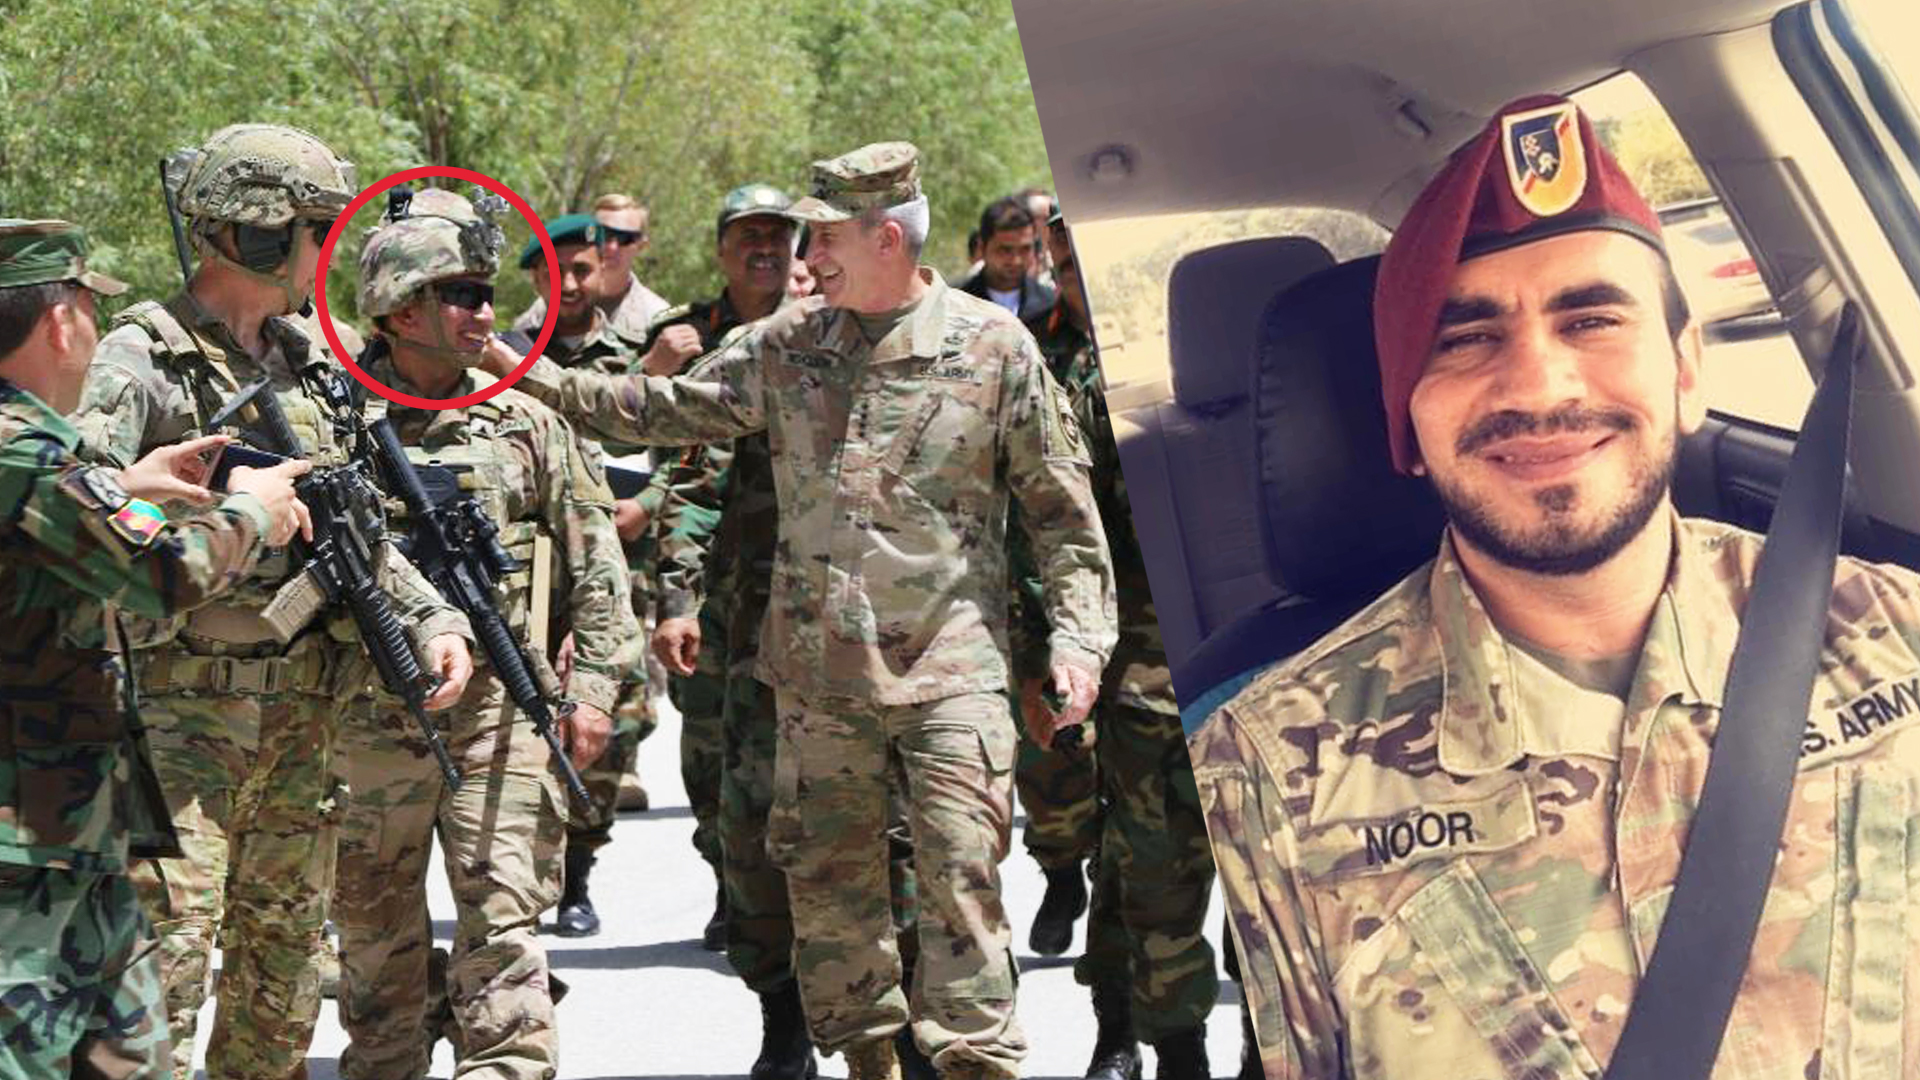 Afghan interpreter/US Army soldier has one final mission Saving his family